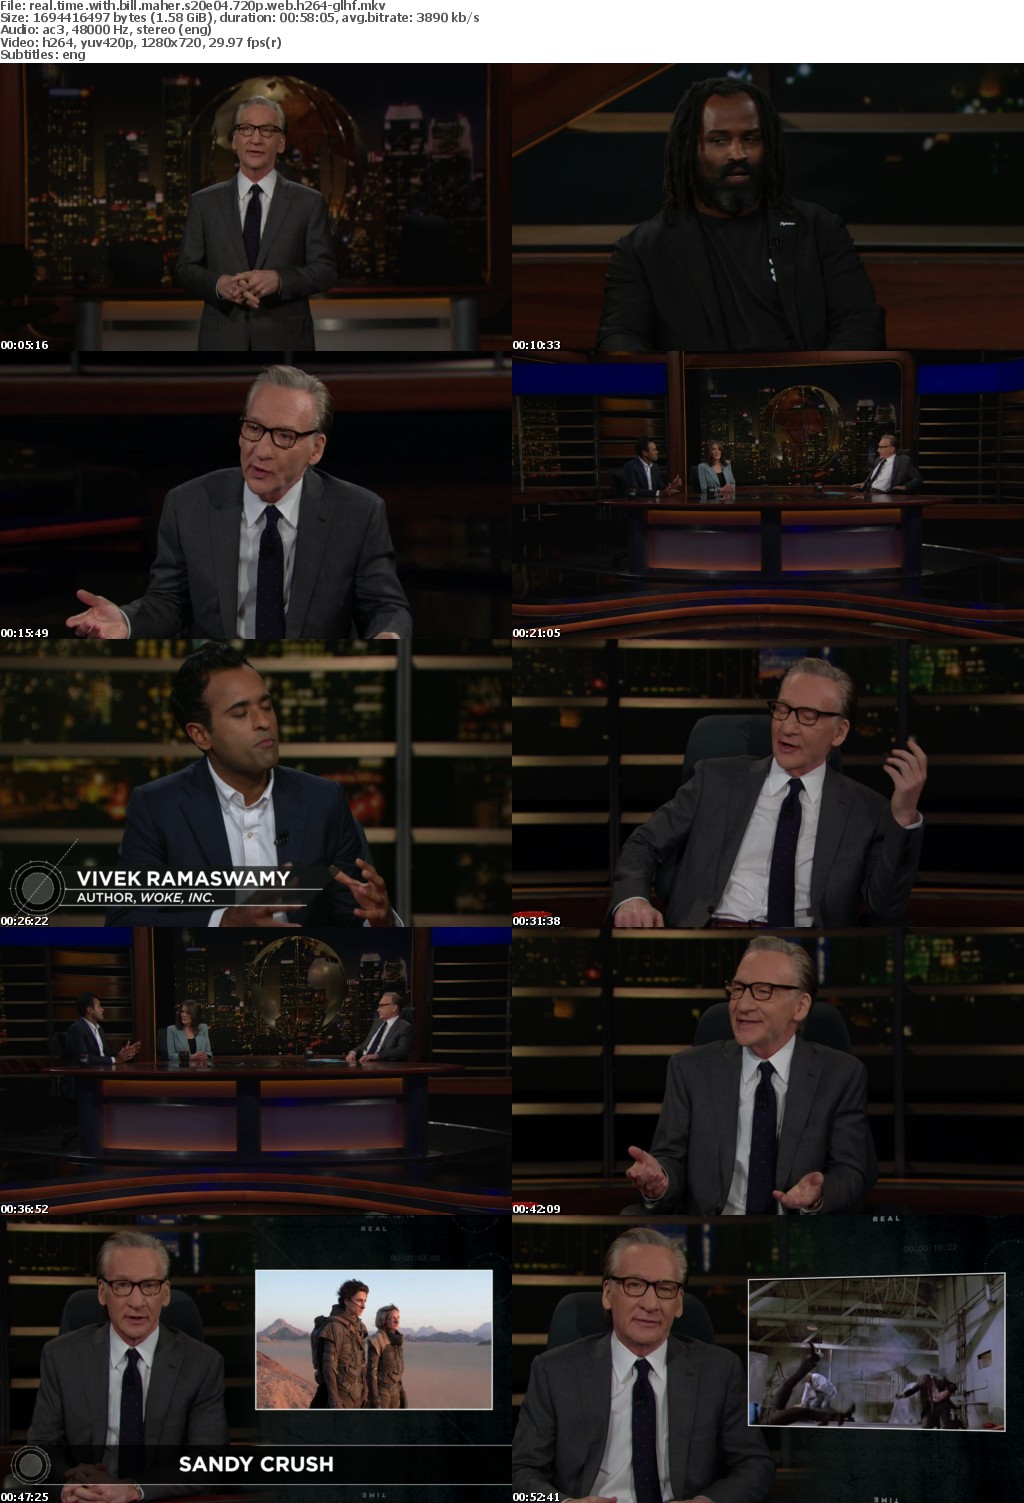 Real Time with Bill Maher S20E04 720p WEB H264-GLHF